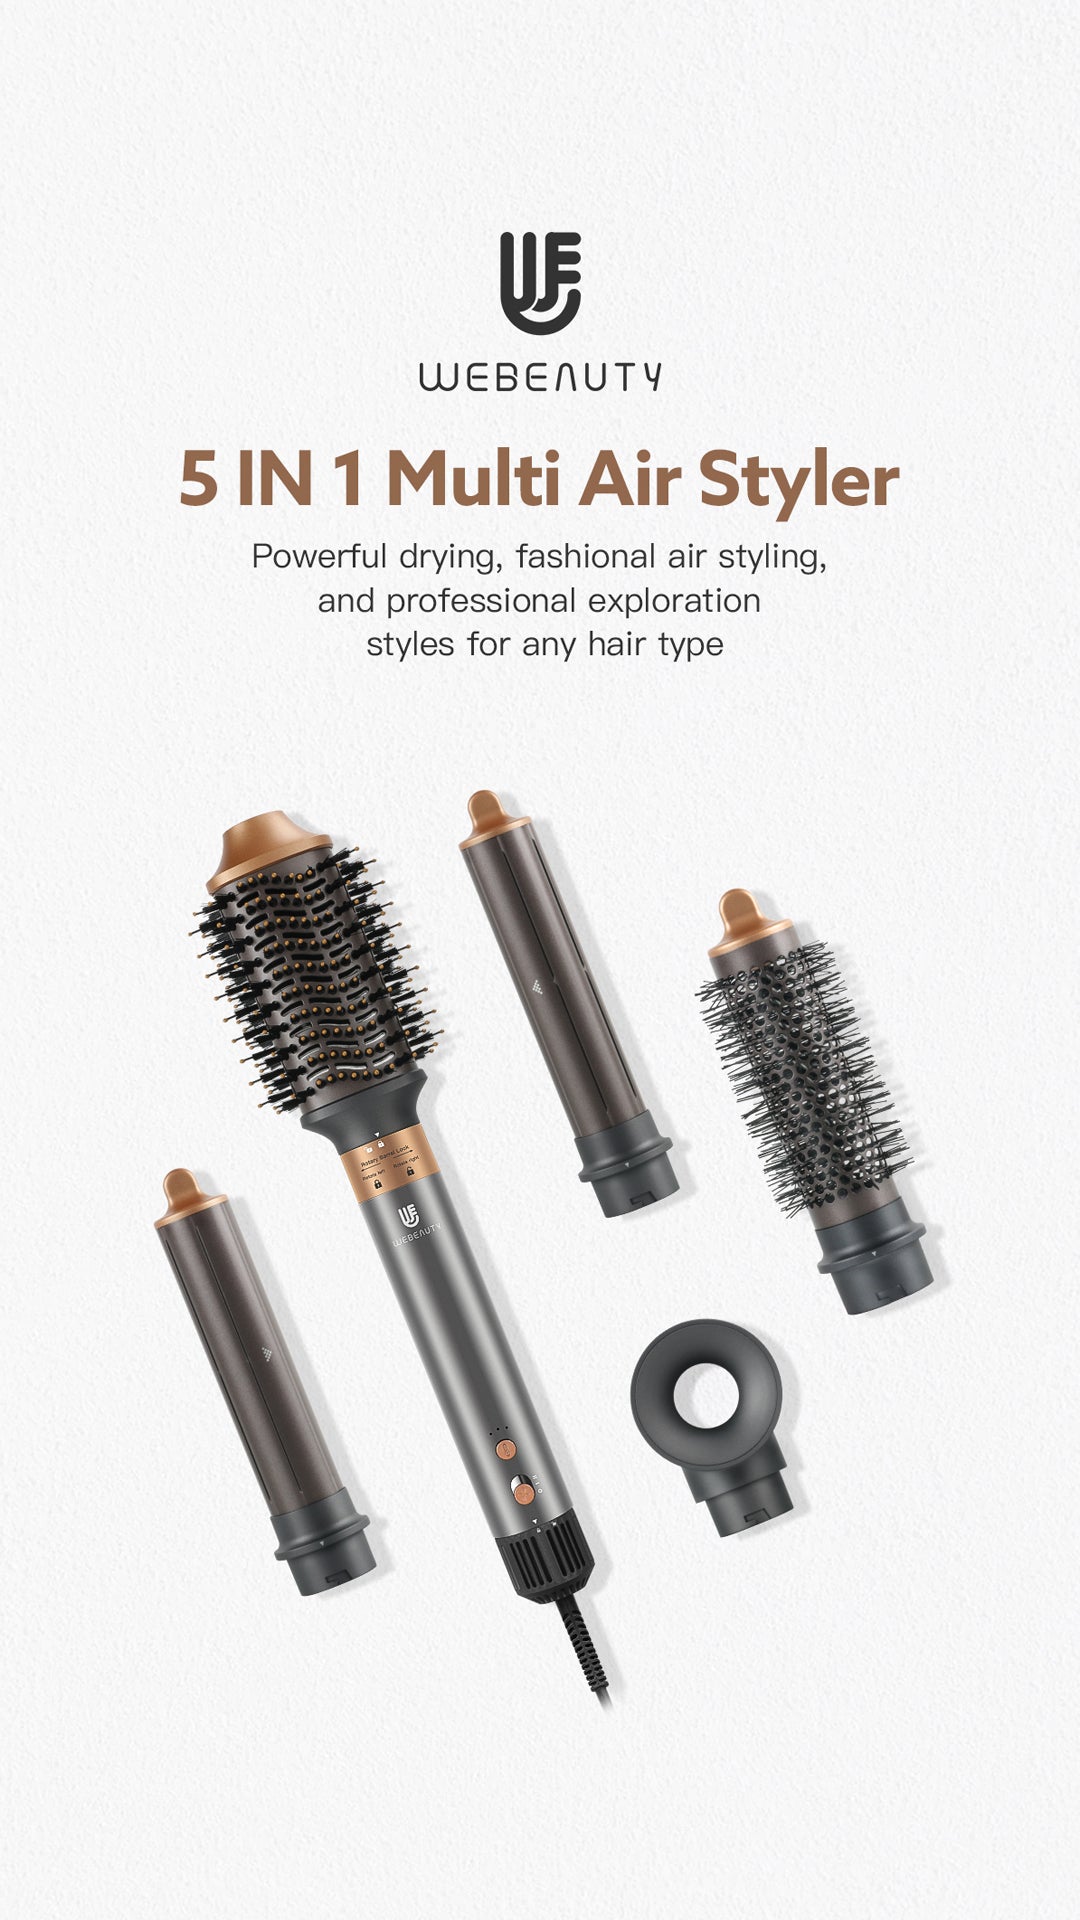 Is the hot air brush worth buying?